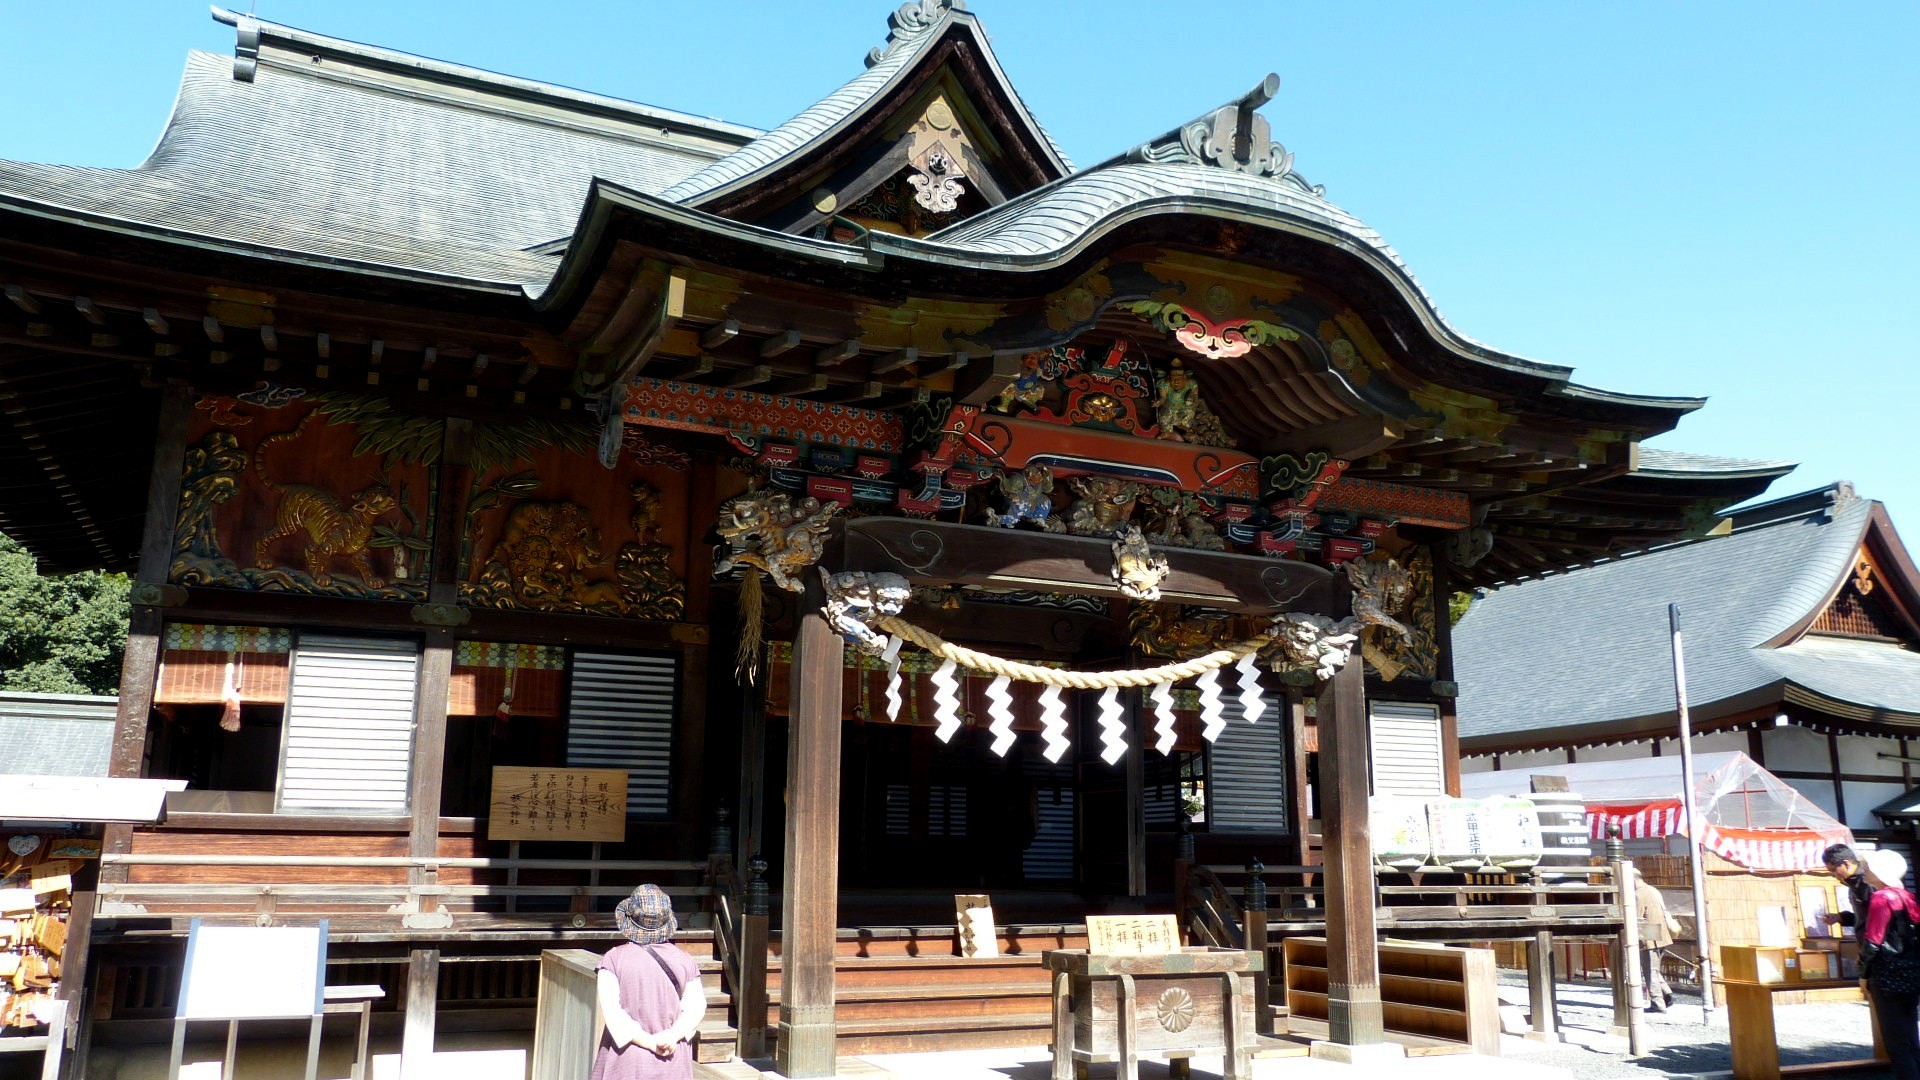 main wooden building with ornate wooden roof